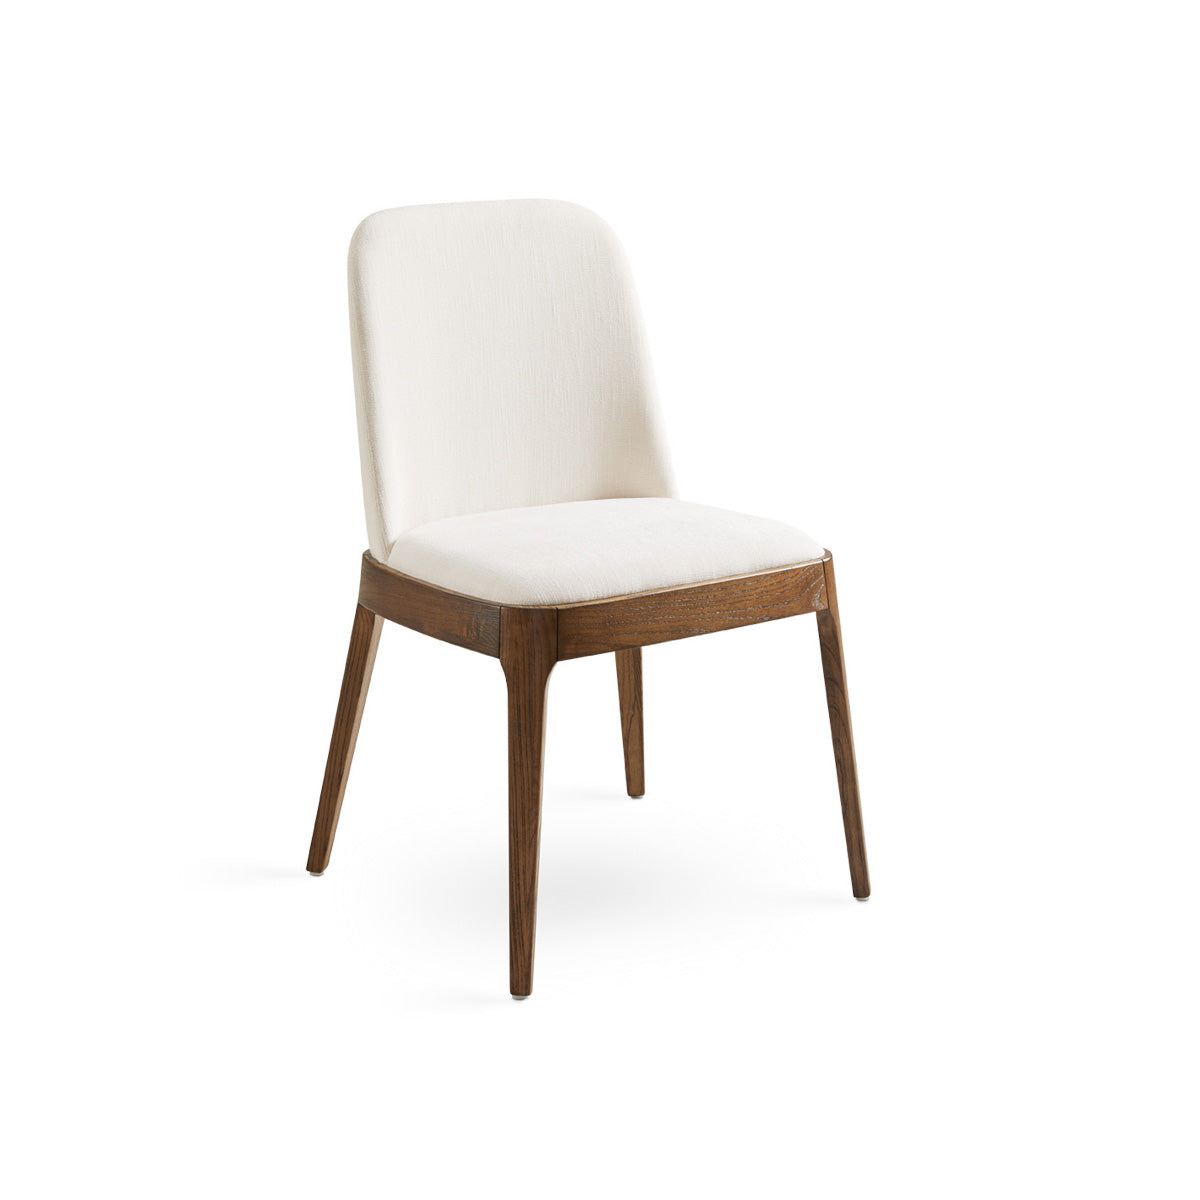 Marlon Dining Chair in Ivory